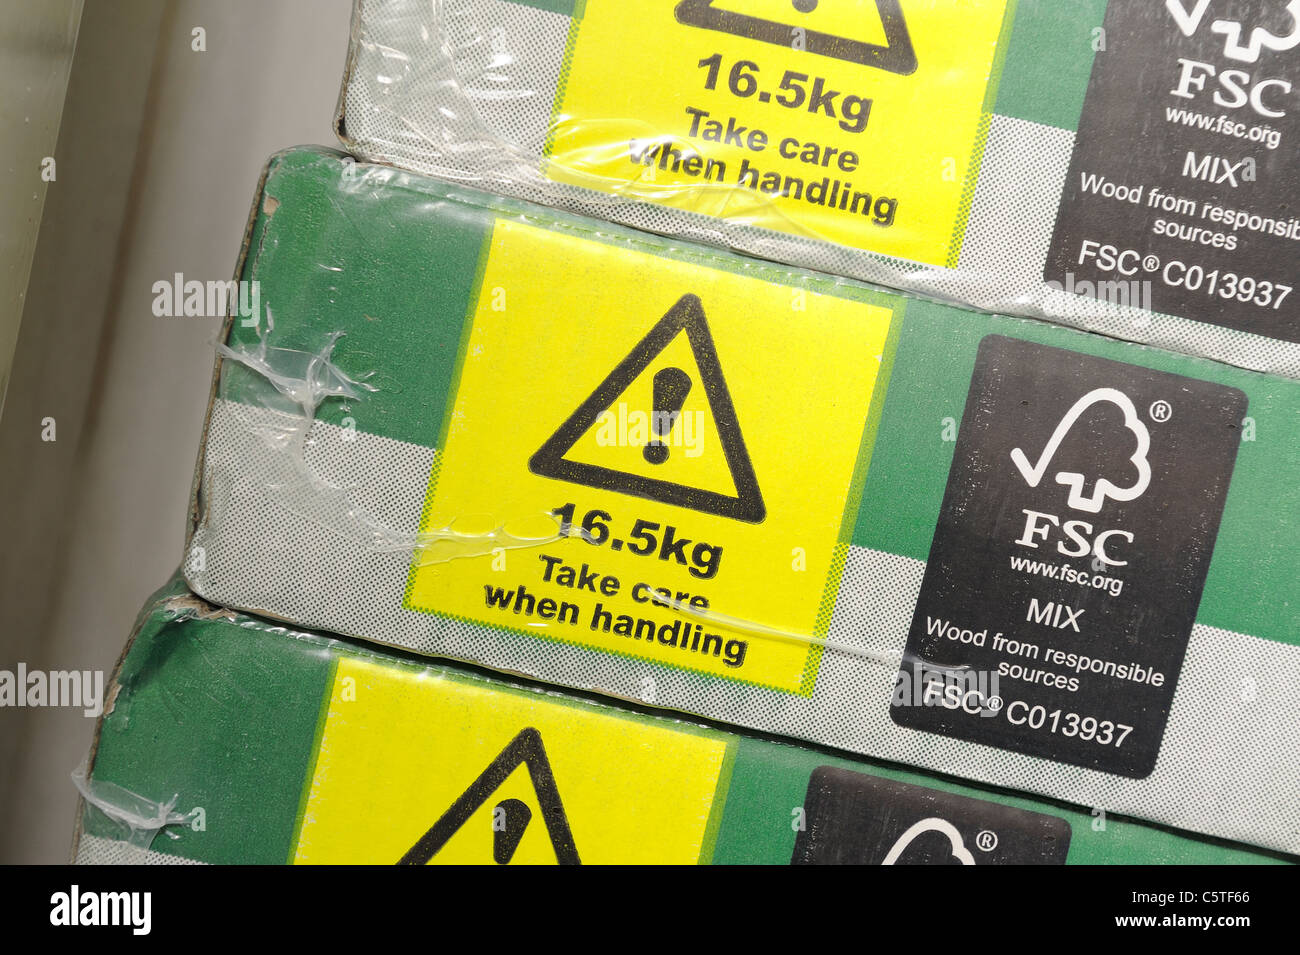 Warning health and safety lifting sign on a wooden flooring box Stock Photo